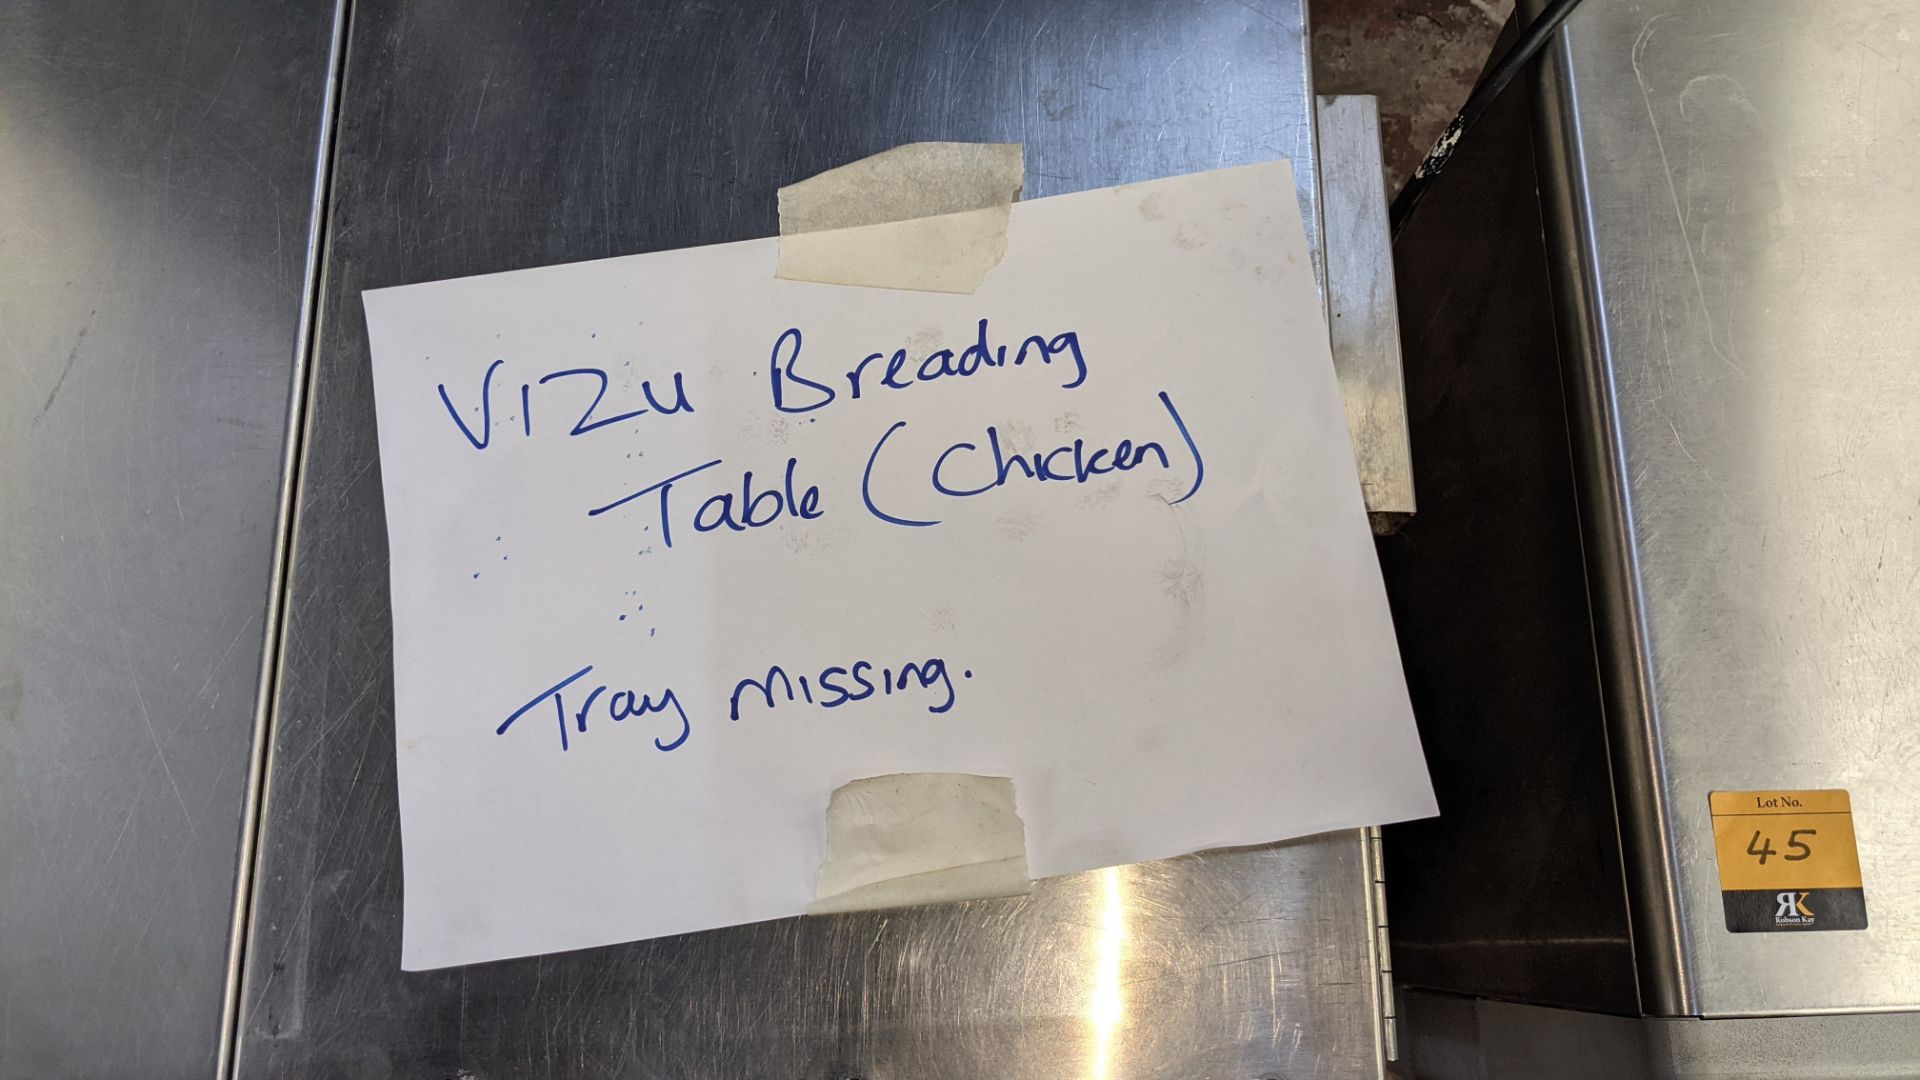 Vizu stainless steel breading table (chicken) - tray missing - Image 4 of 9